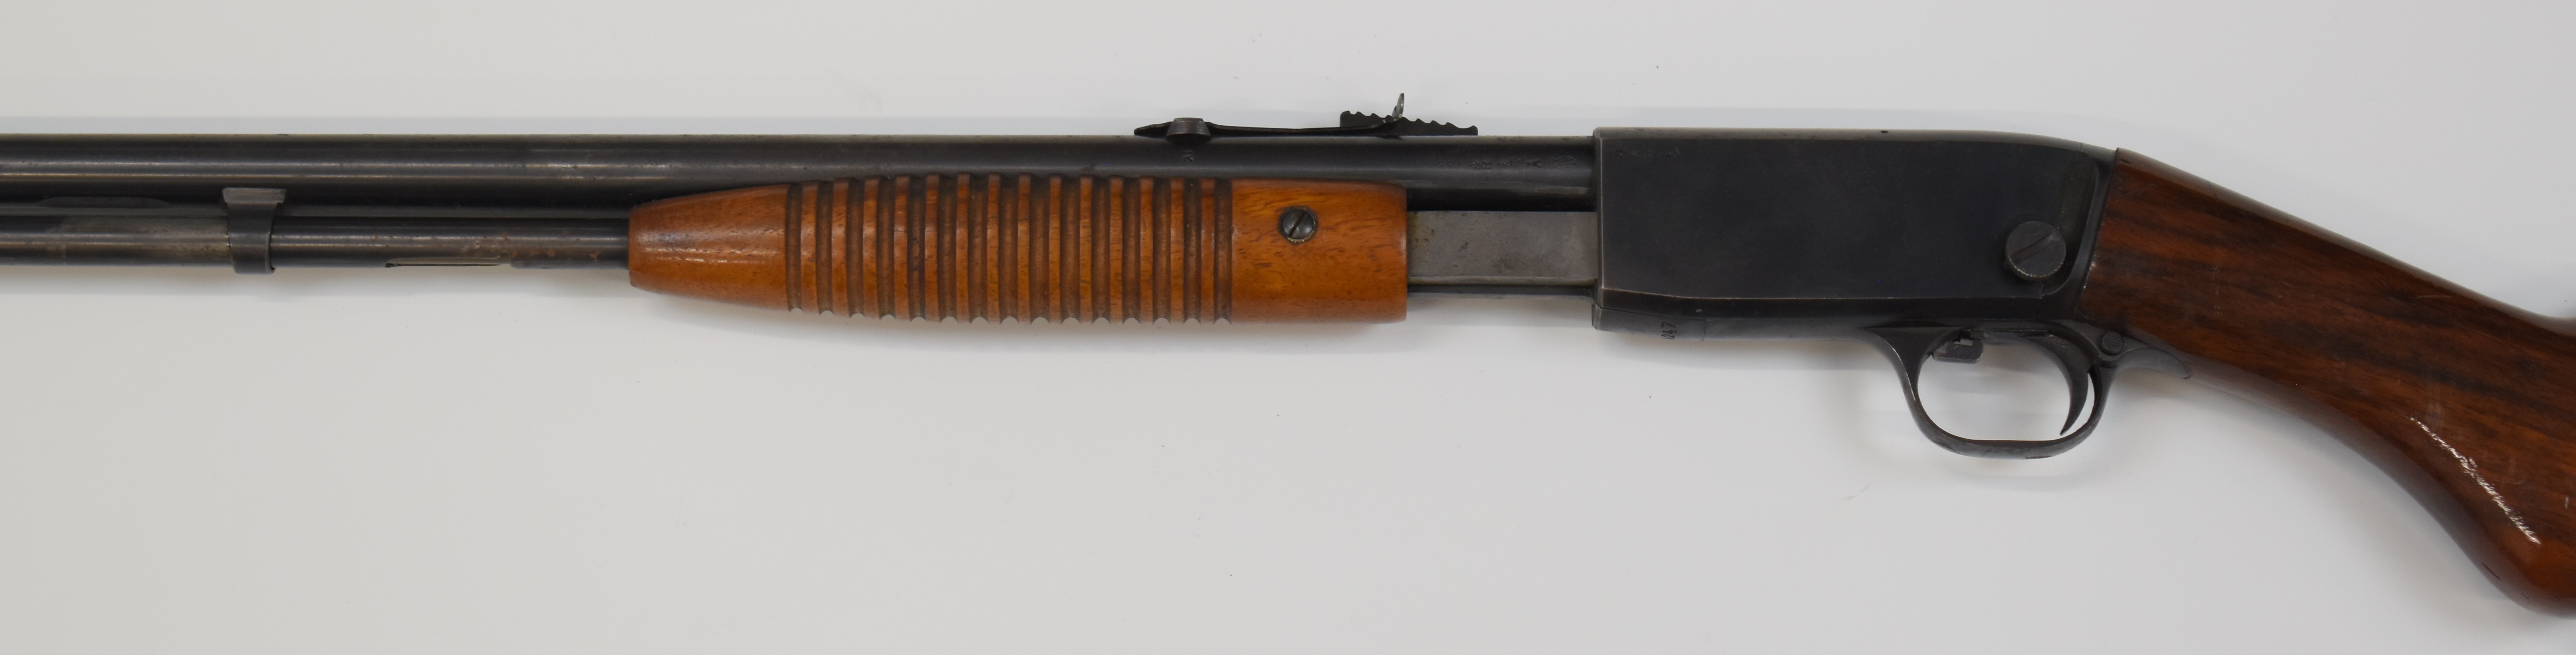 Browning .22 pump-action rifle with semi-pistol grip, adjustable sights and 21.5 inch barrel, - Image 8 of 9